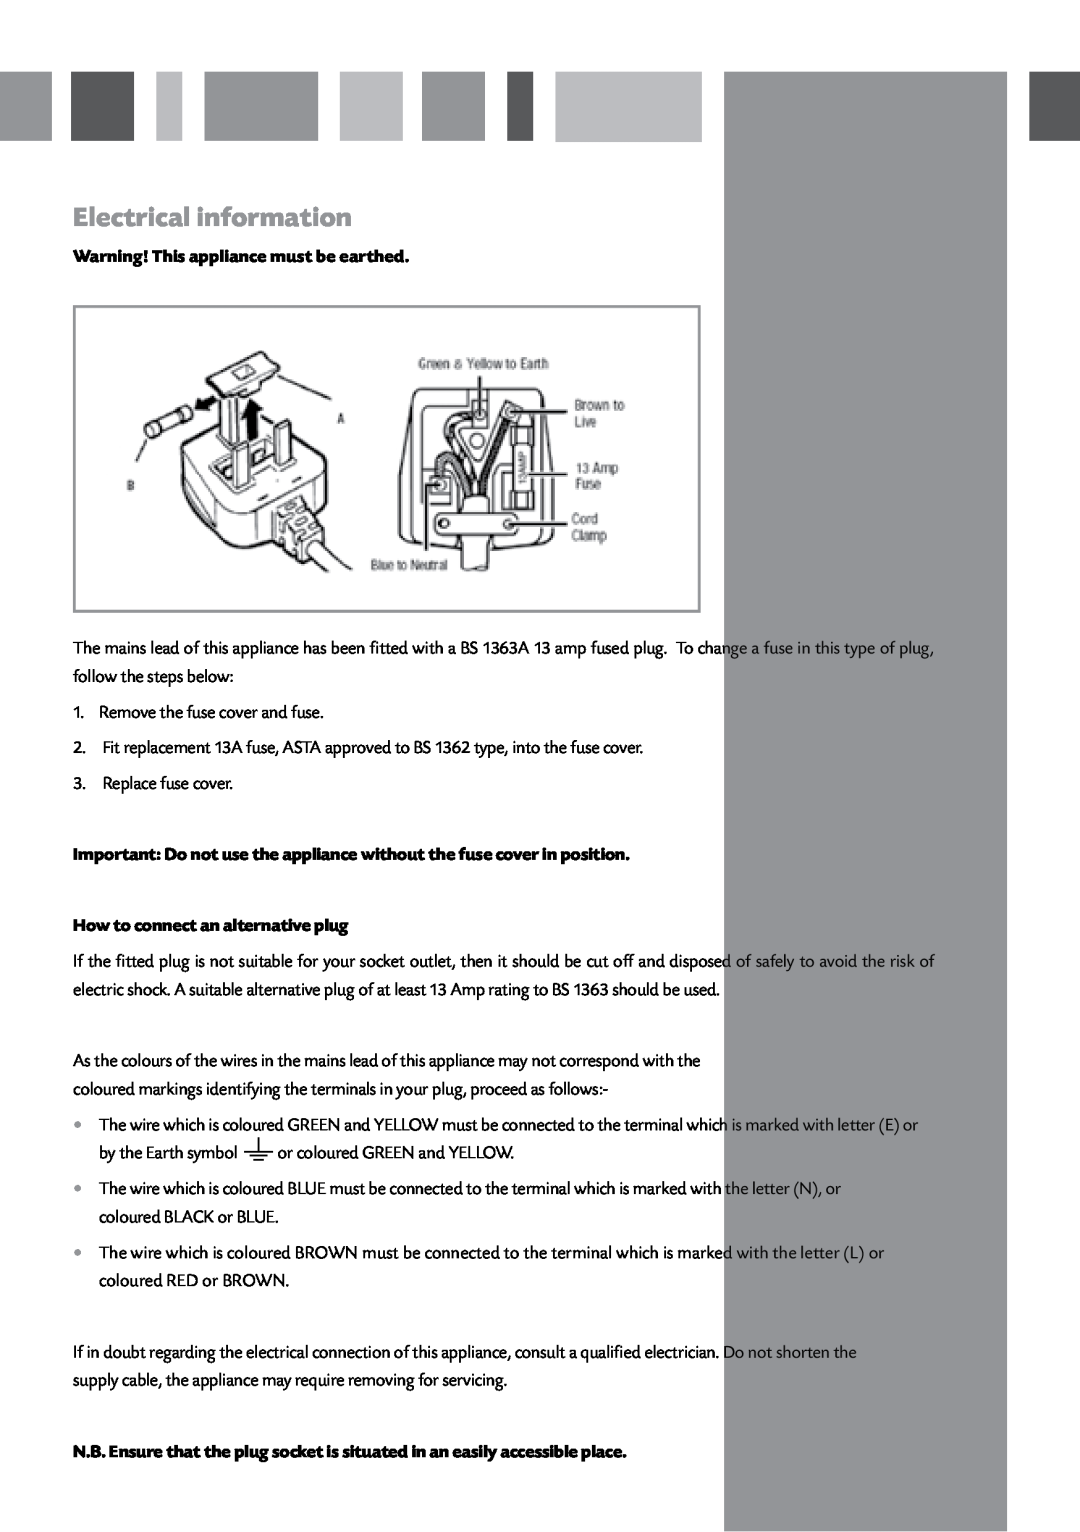 CDA WF140 manual Electrical information, Warning! This appliance must be earthed, How to connect an alternative plug 